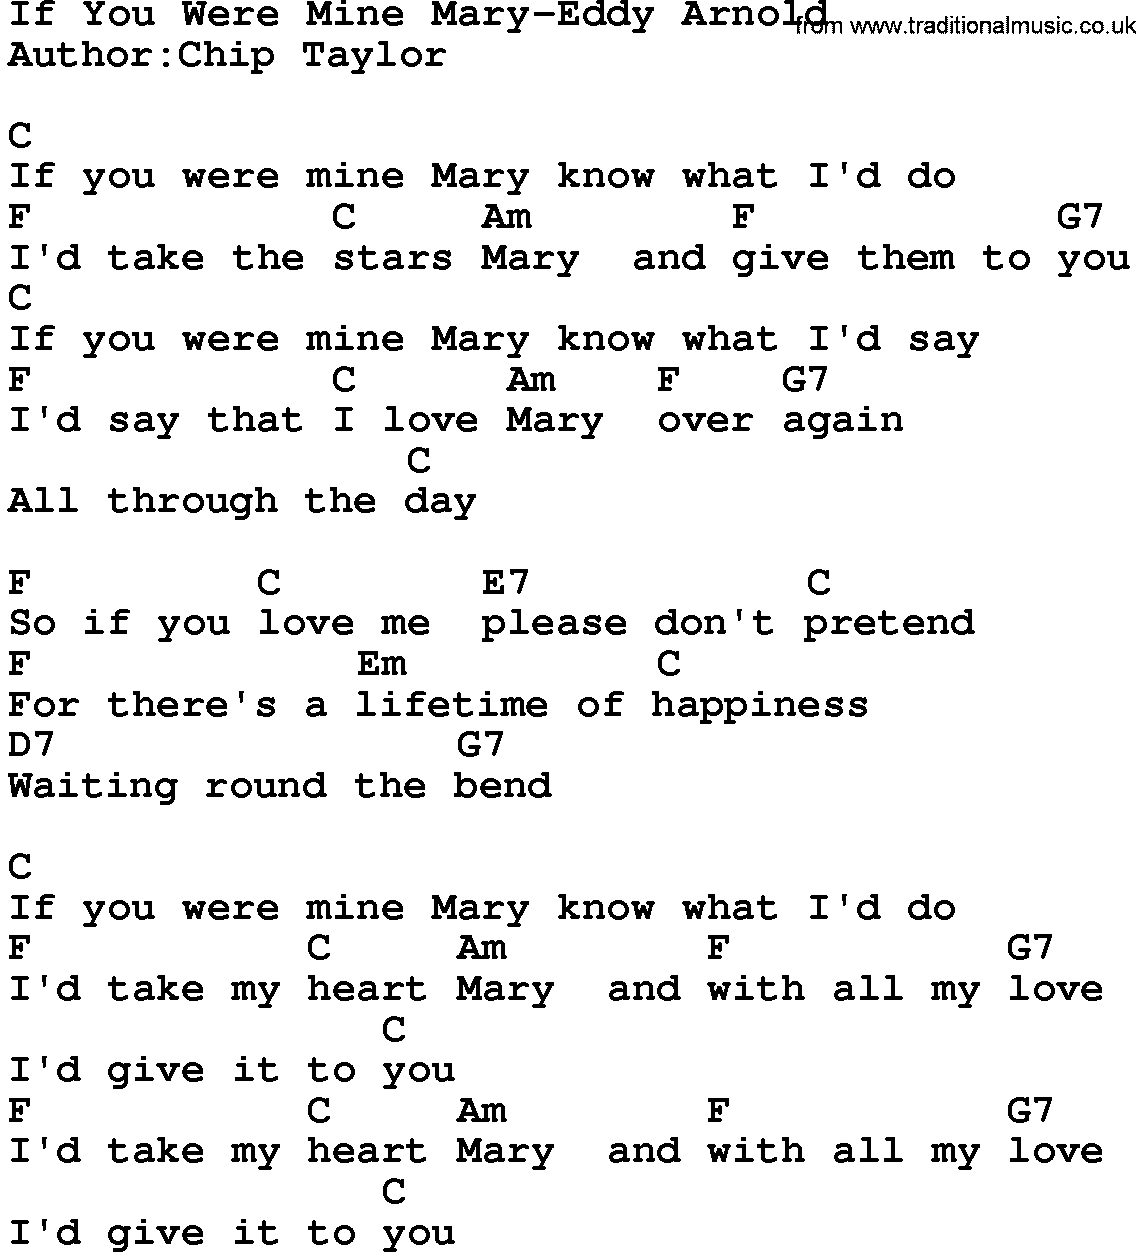 Country music song: If You Were Mine Mary-Eddy Arnold lyrics and chords